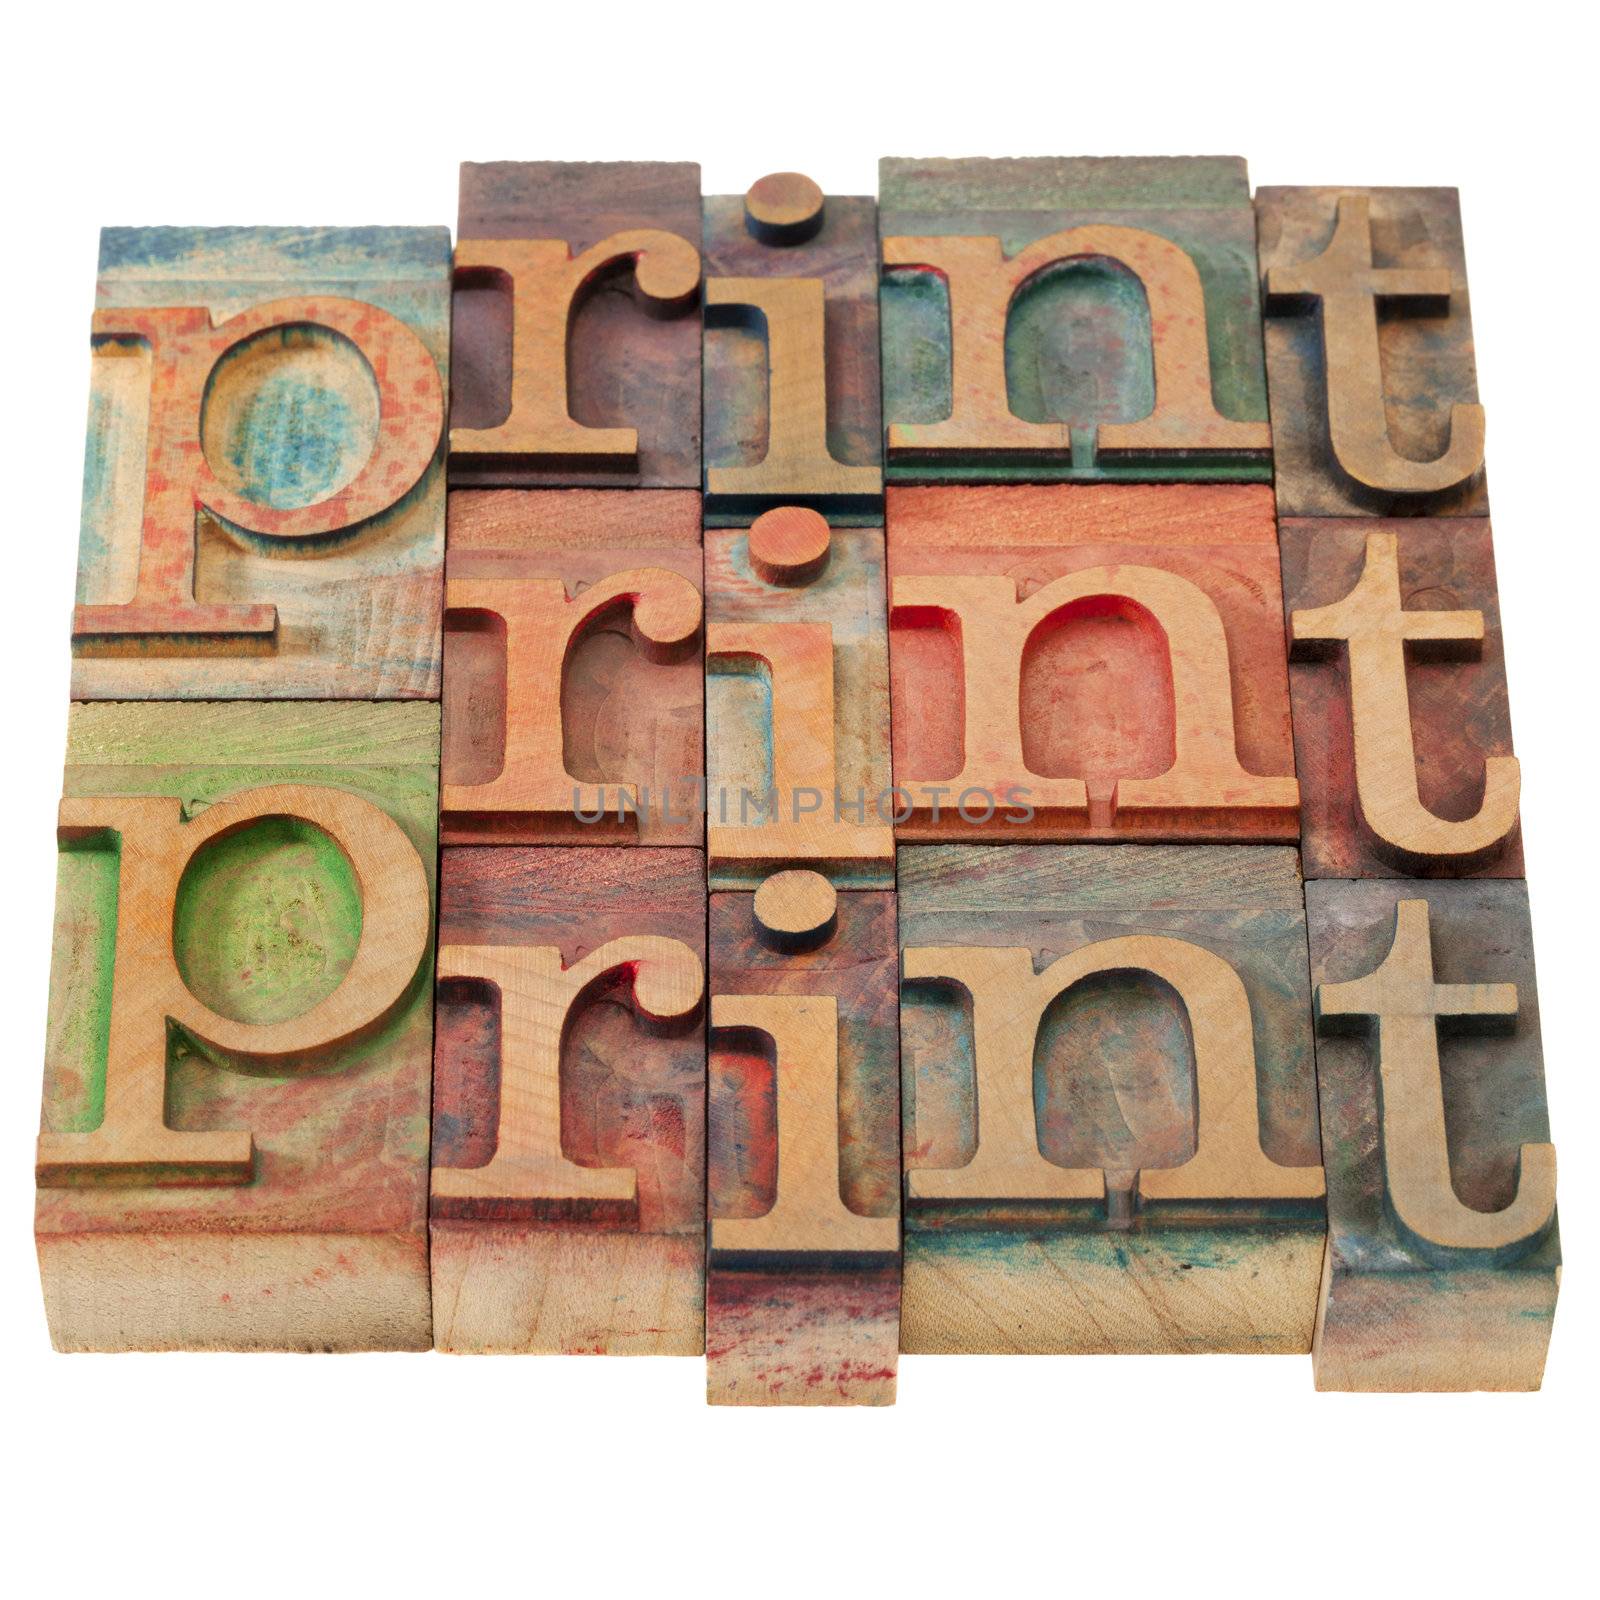 print word abstract by PixelsAway